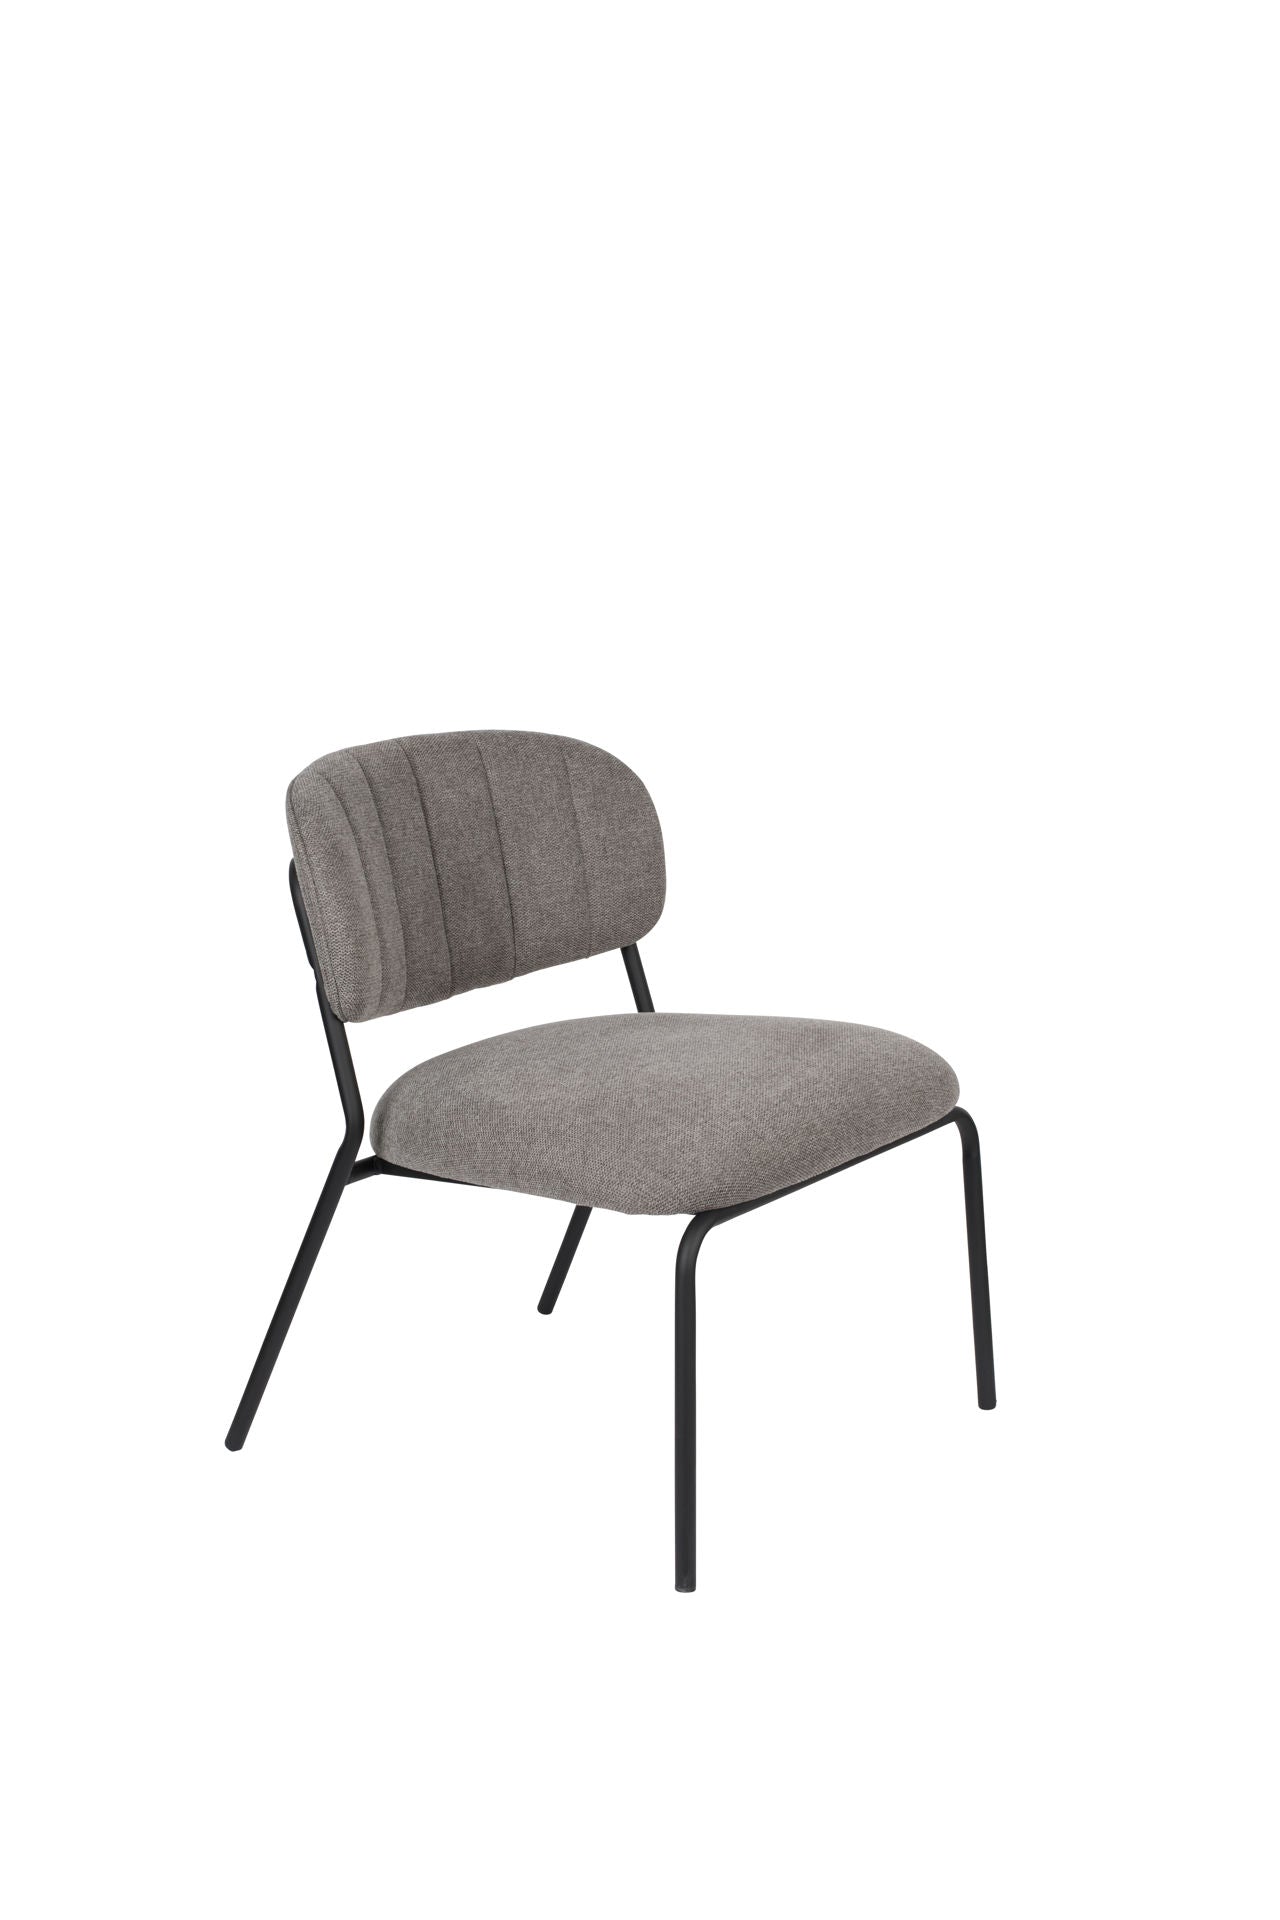 Nancy's Scotts Valley Lounge Chair 2 pieces - Industrial - Gray - Polyester, Plywood, Steel - 60 cm x 56 cm x 68 cm